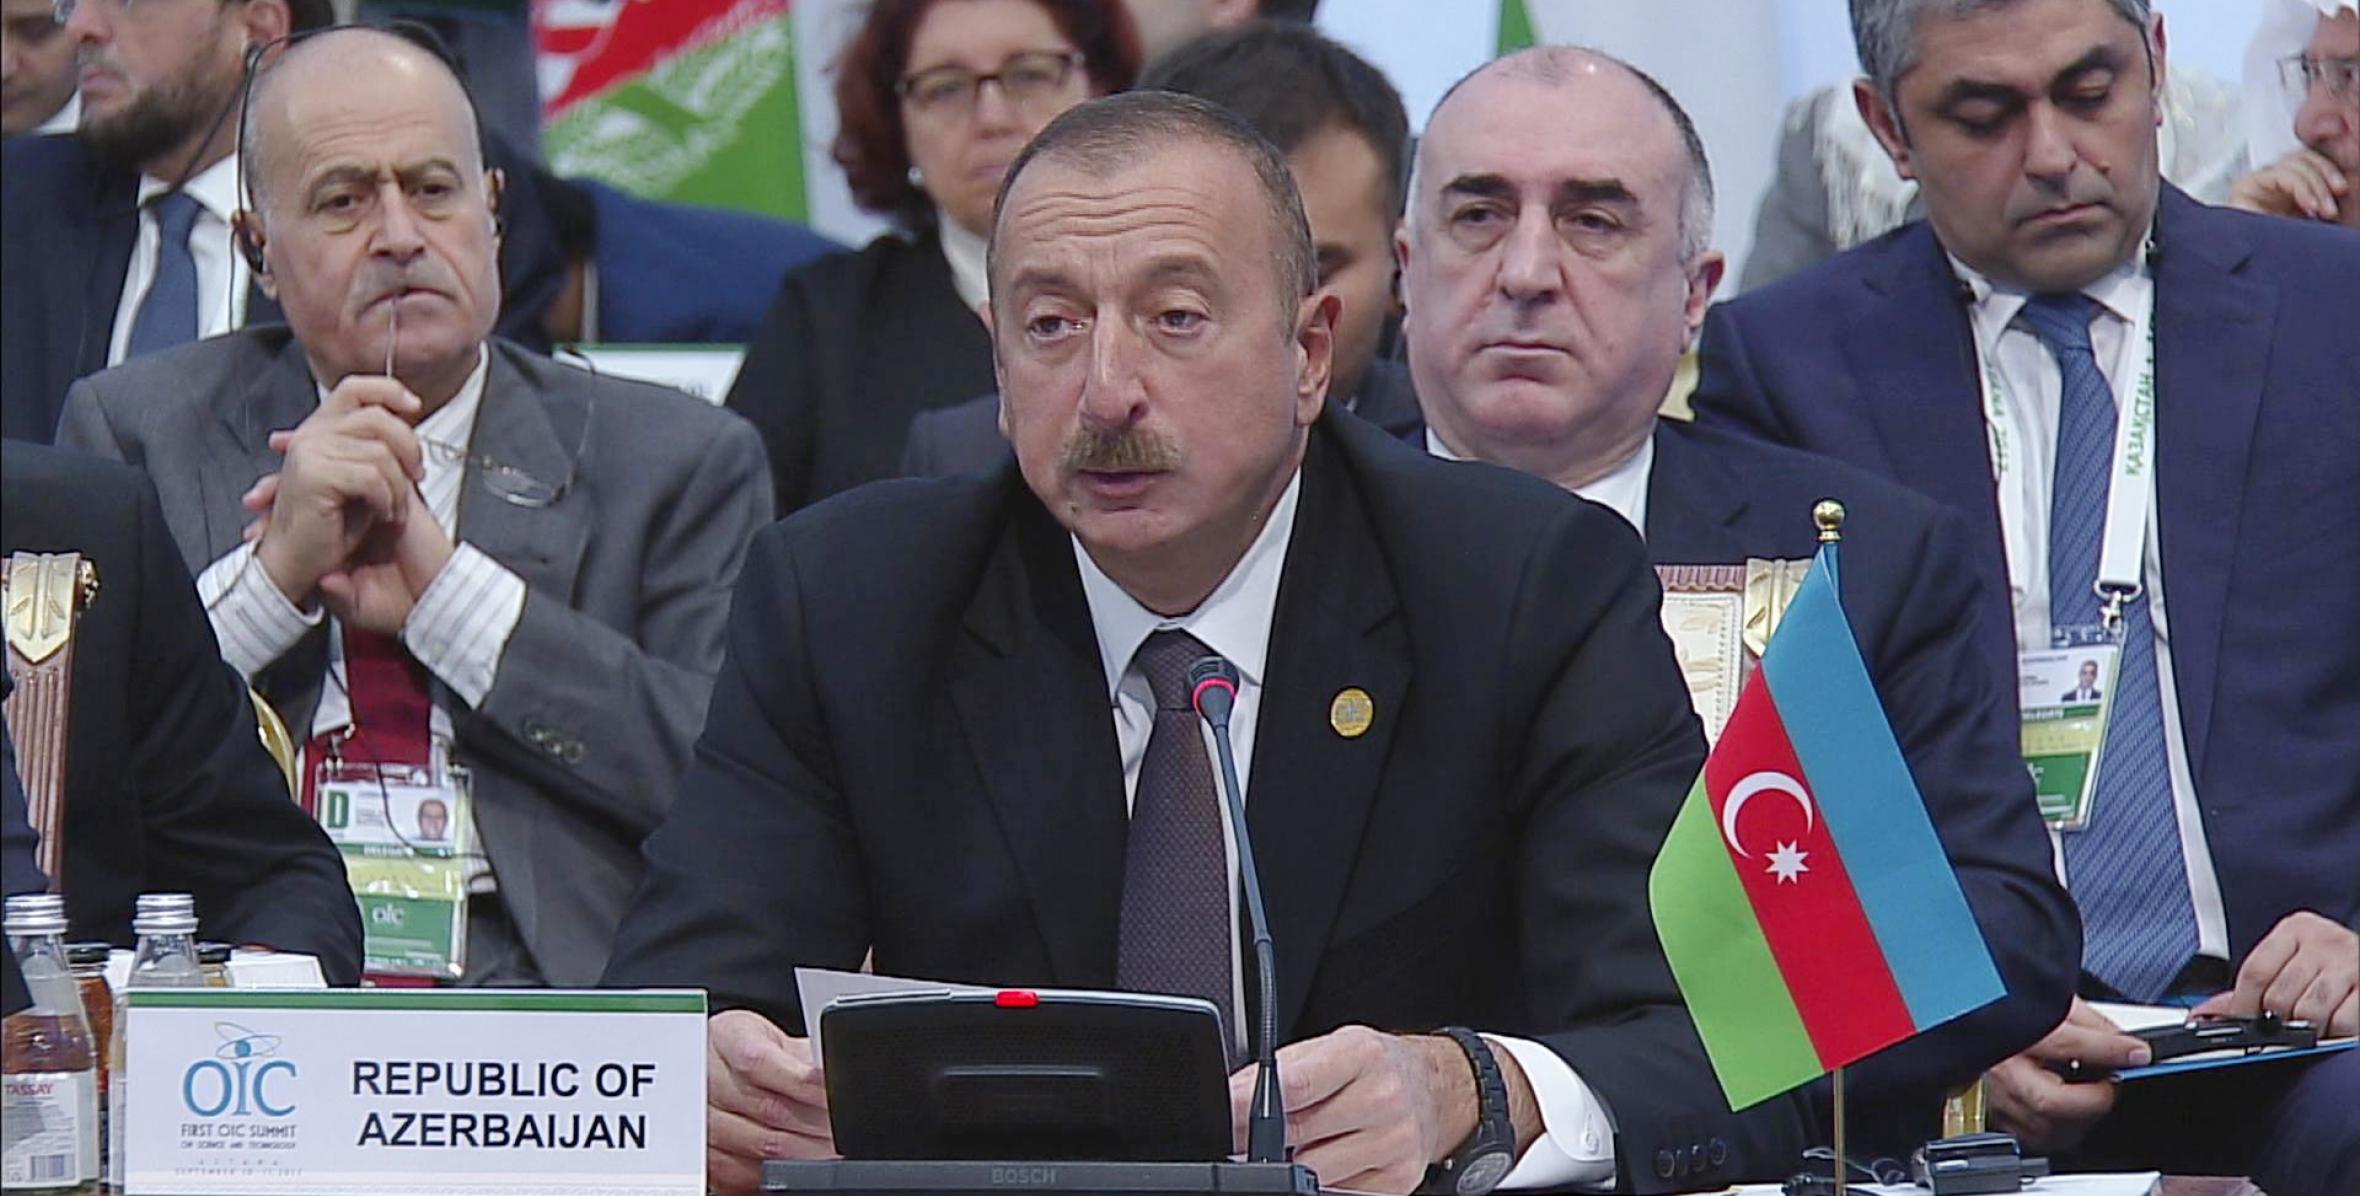 Speech by Ilham Aliyev at  the first Summit on Science and Technology of Organization of Islamic Cooperation in Astana